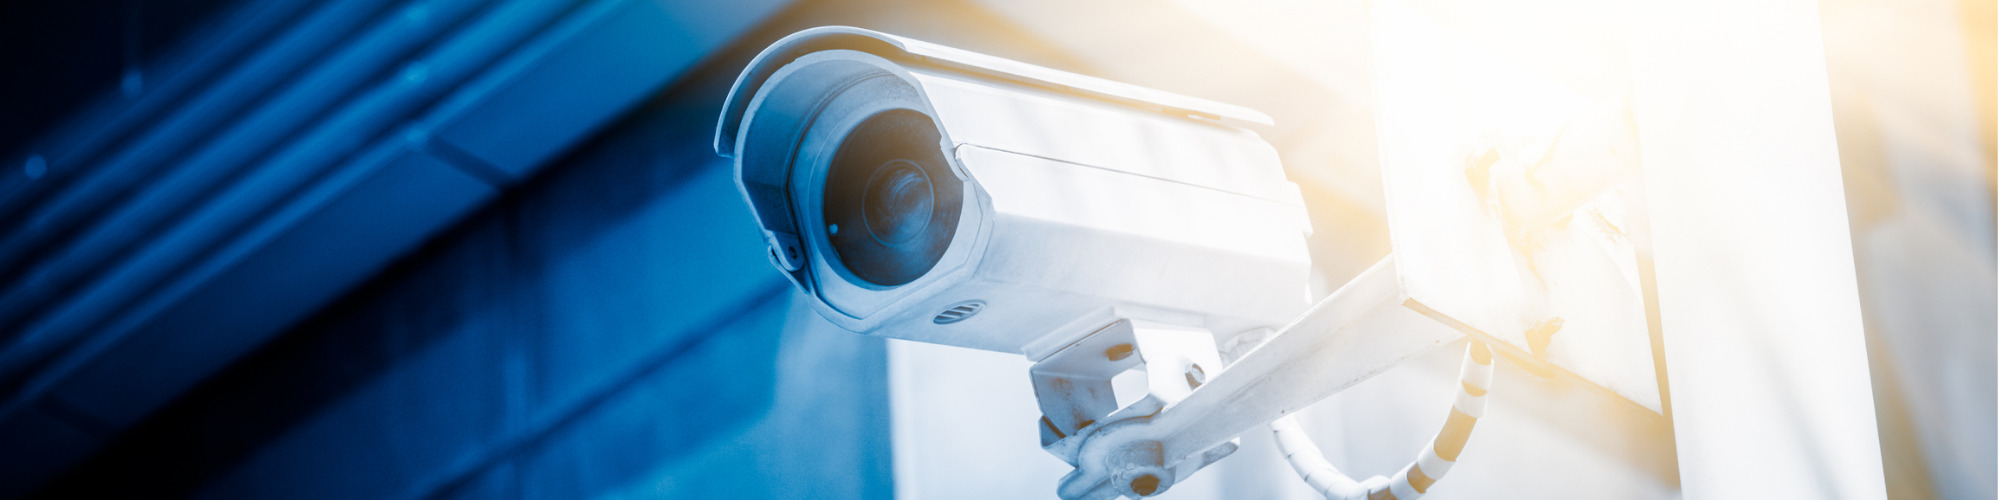 Surveillance Evidence in Personal Injury Claims - Current Rules, Tactics & Caselaw